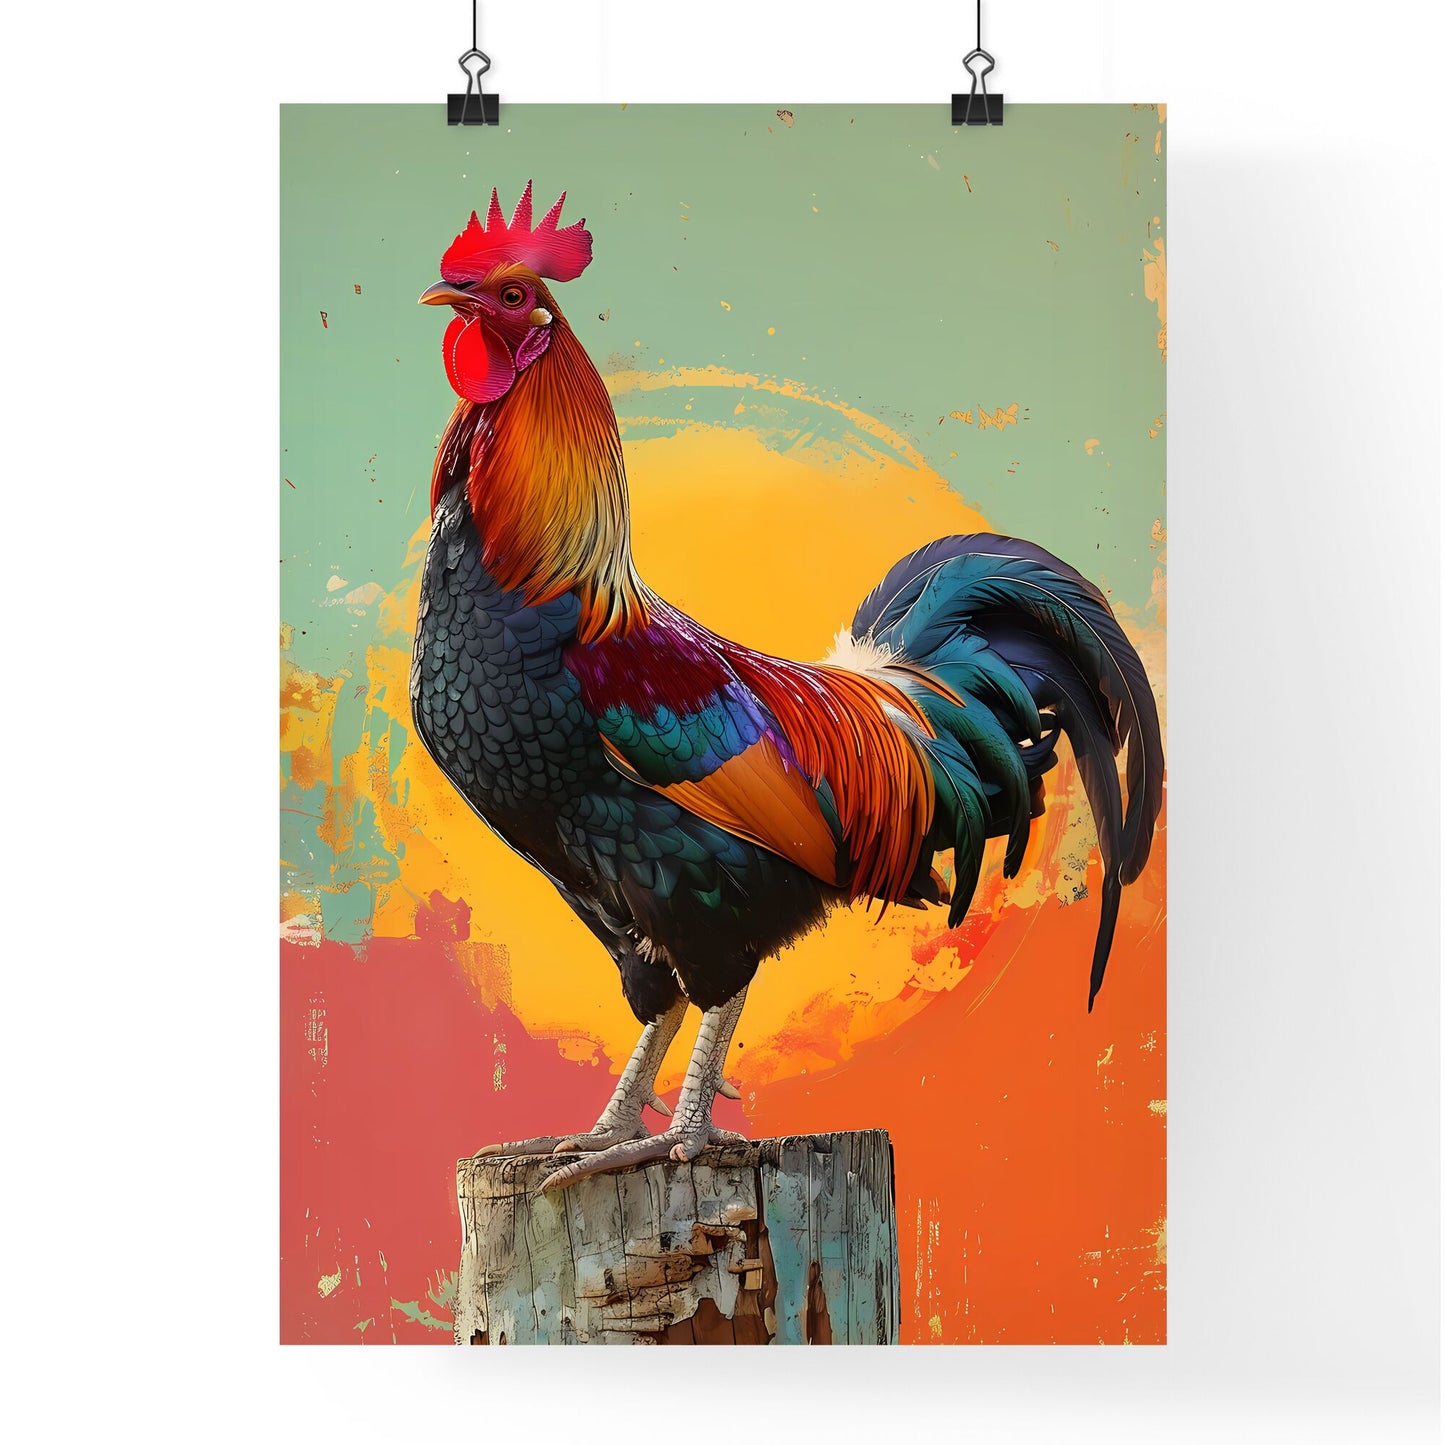 Pop art rooster painting standing on post, vibrant colors, art, popart, rooster, post, painting, vibrant Default Title